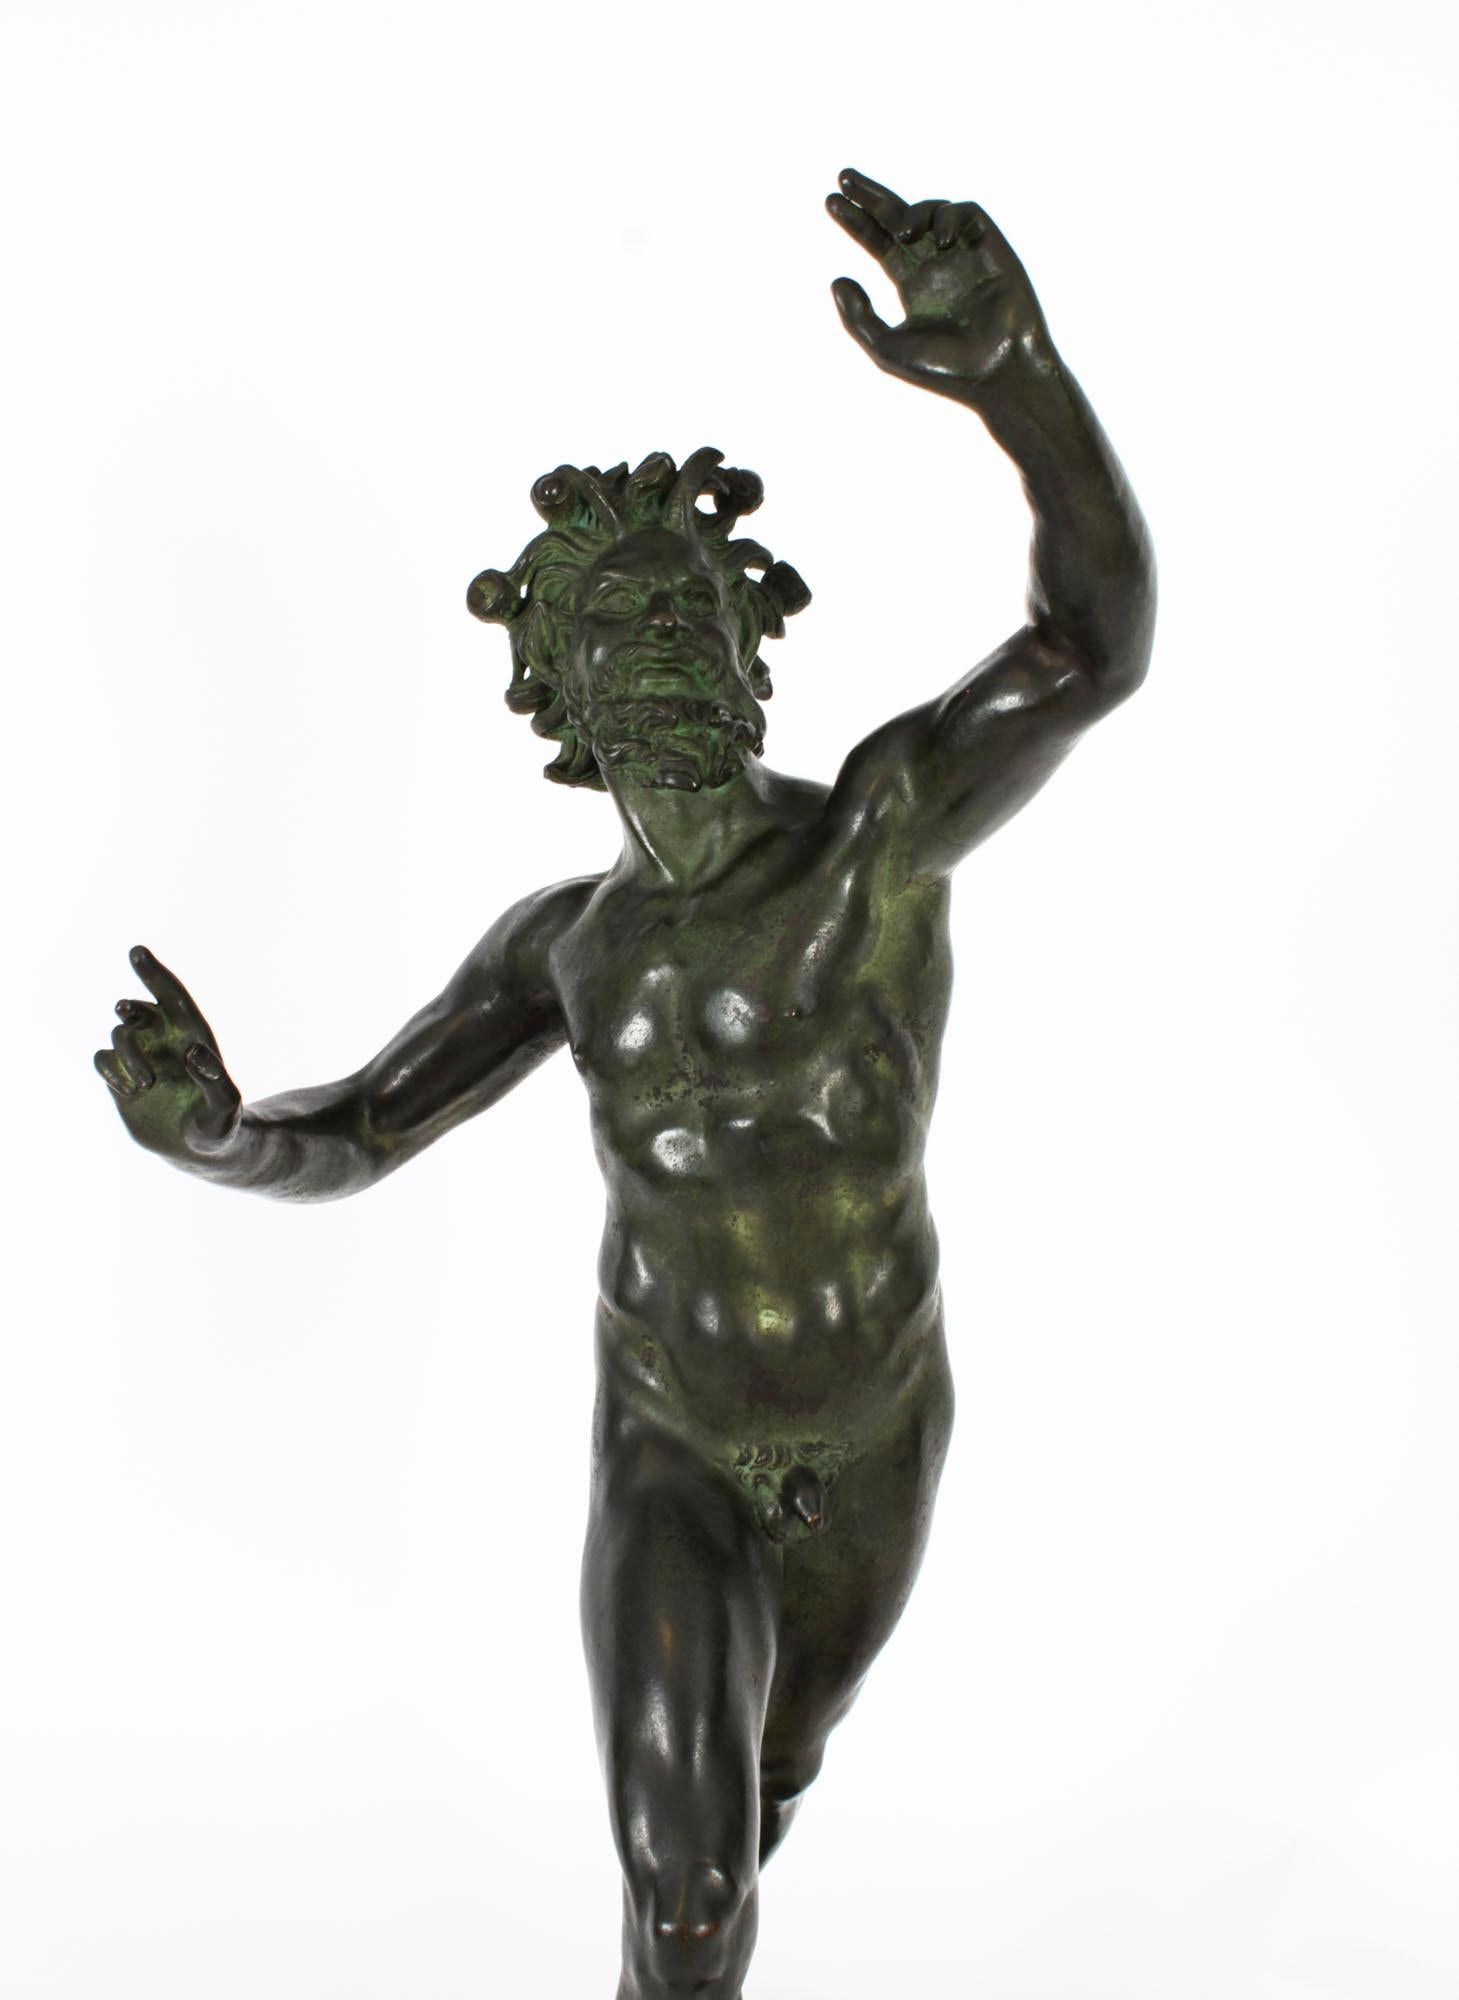 This is a monumental Italian bronze sculpture of Pan the Roman fertility God of the forest, signed G. Nisini, Roma, circa 1830 in date.
 
The sculpture features Pan dancing naked, he has horns, flowing hair and a tail. The statue rests on a